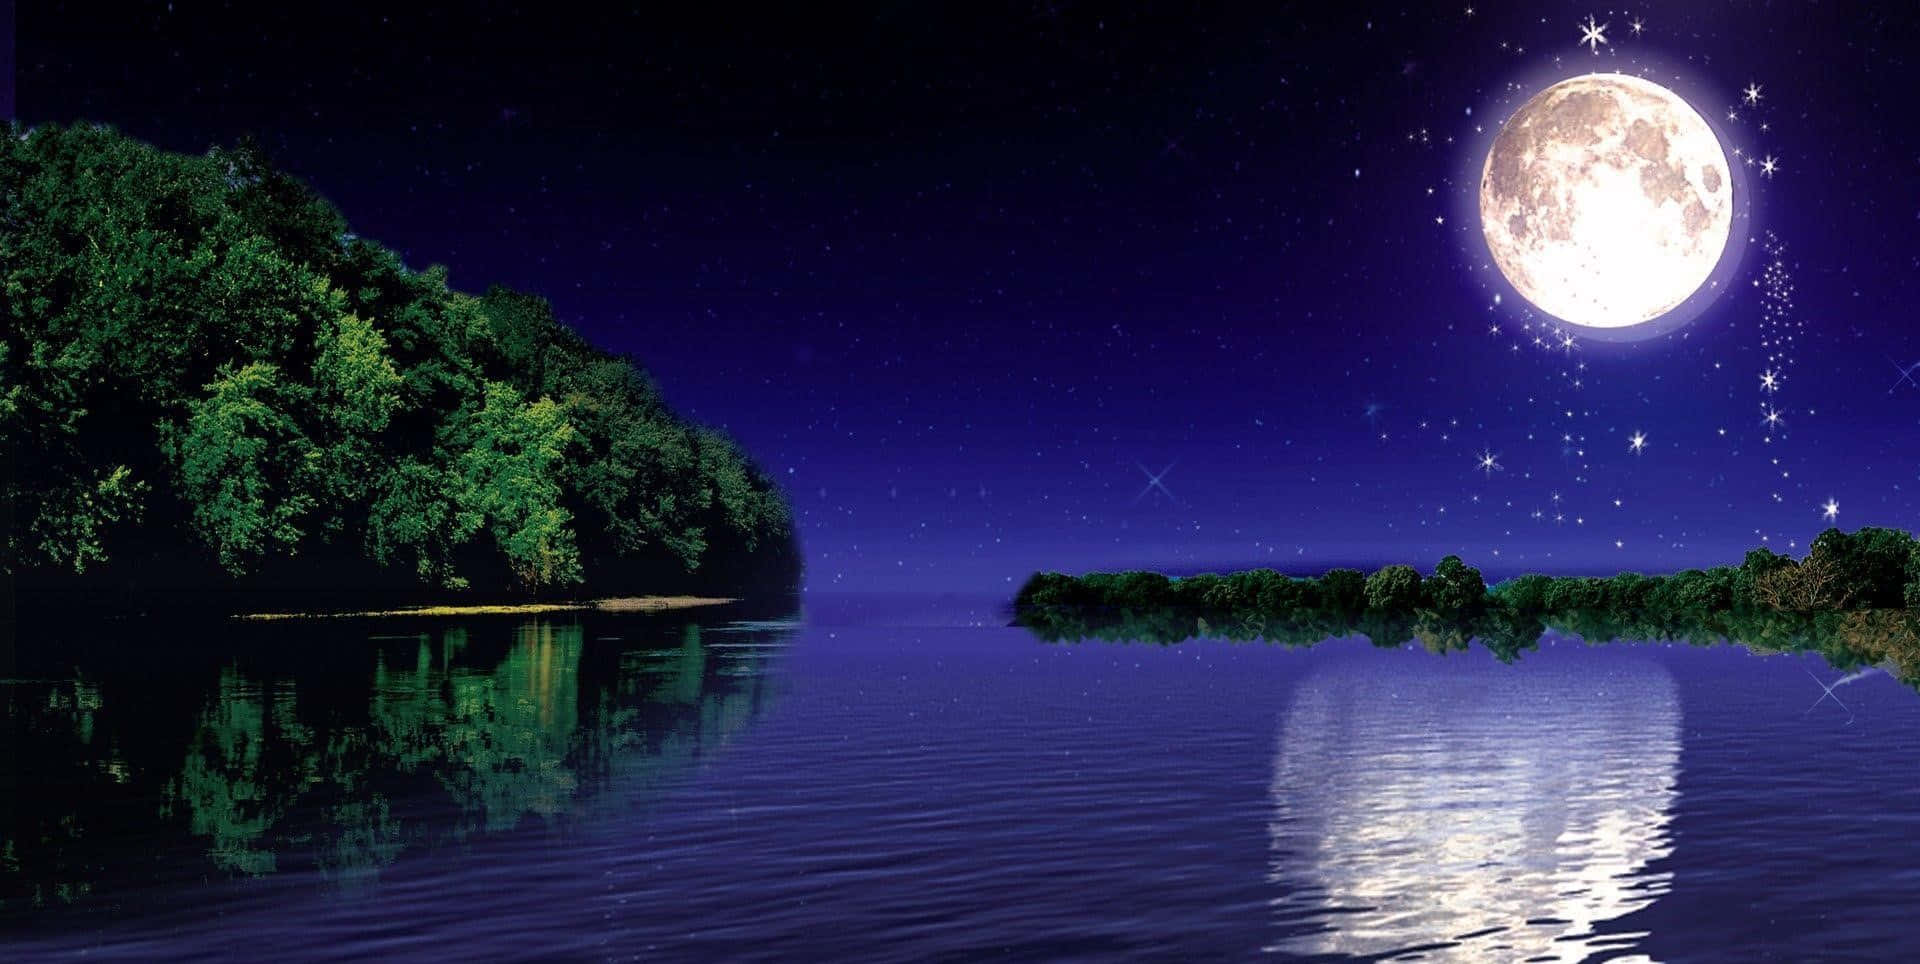 "A serene moonlit night by the waterfront"